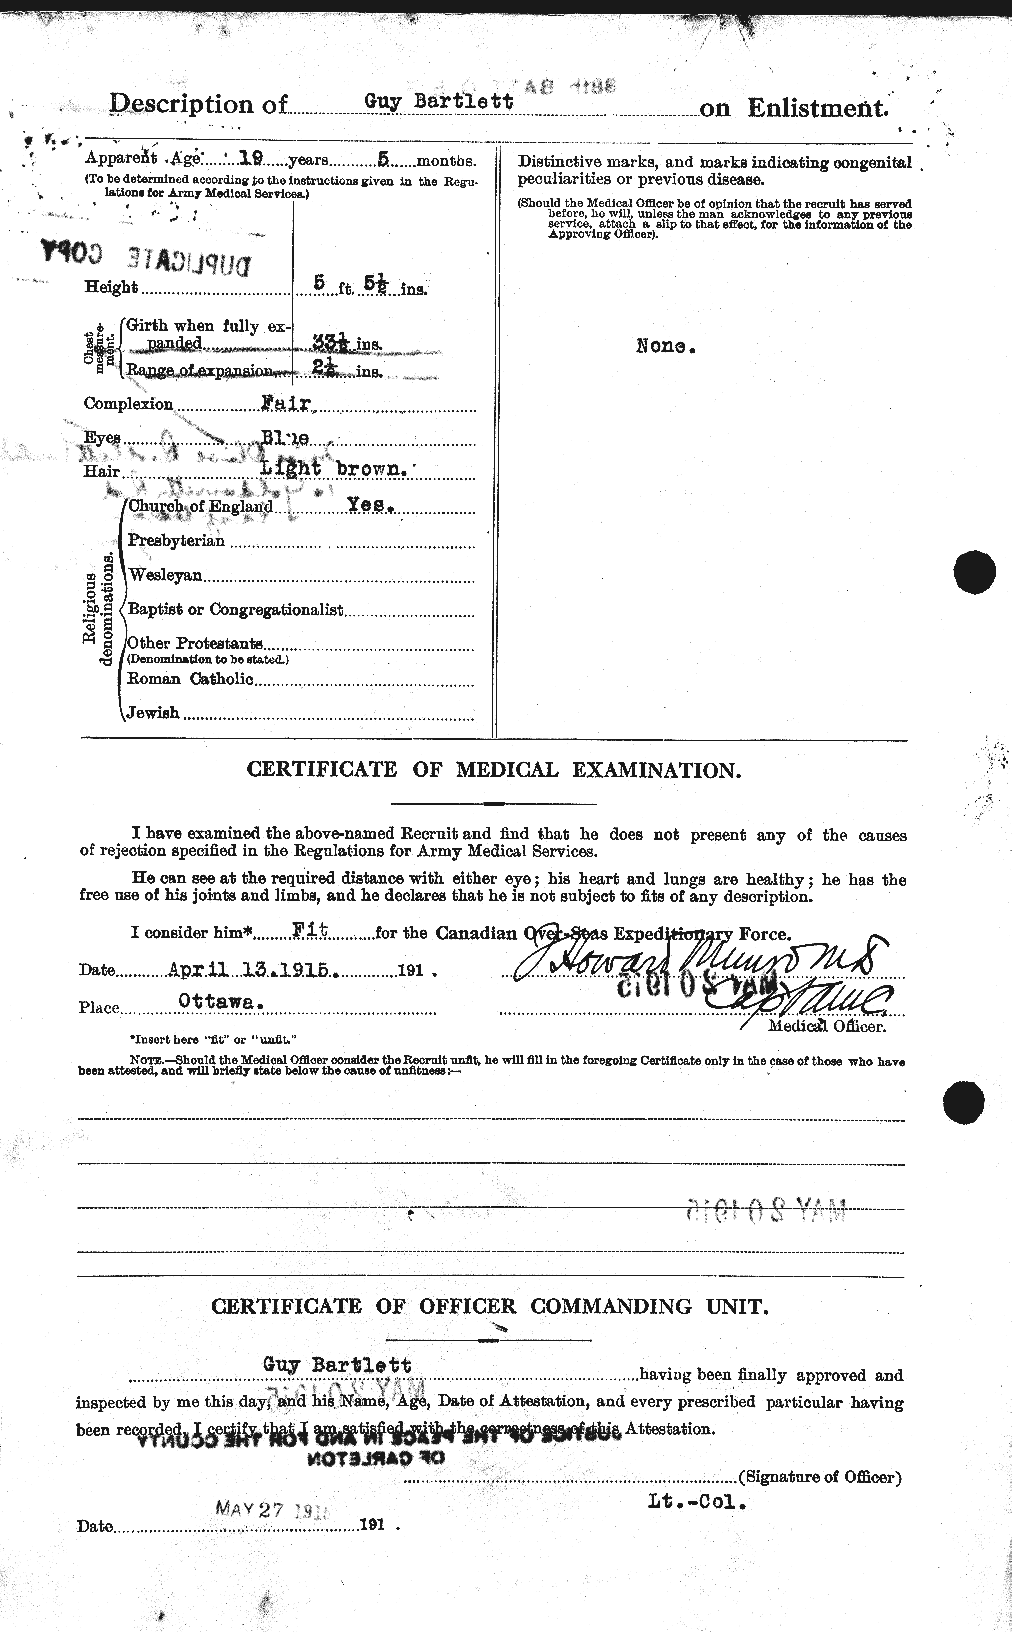 Personnel Records of the First World War - CEF 229250b